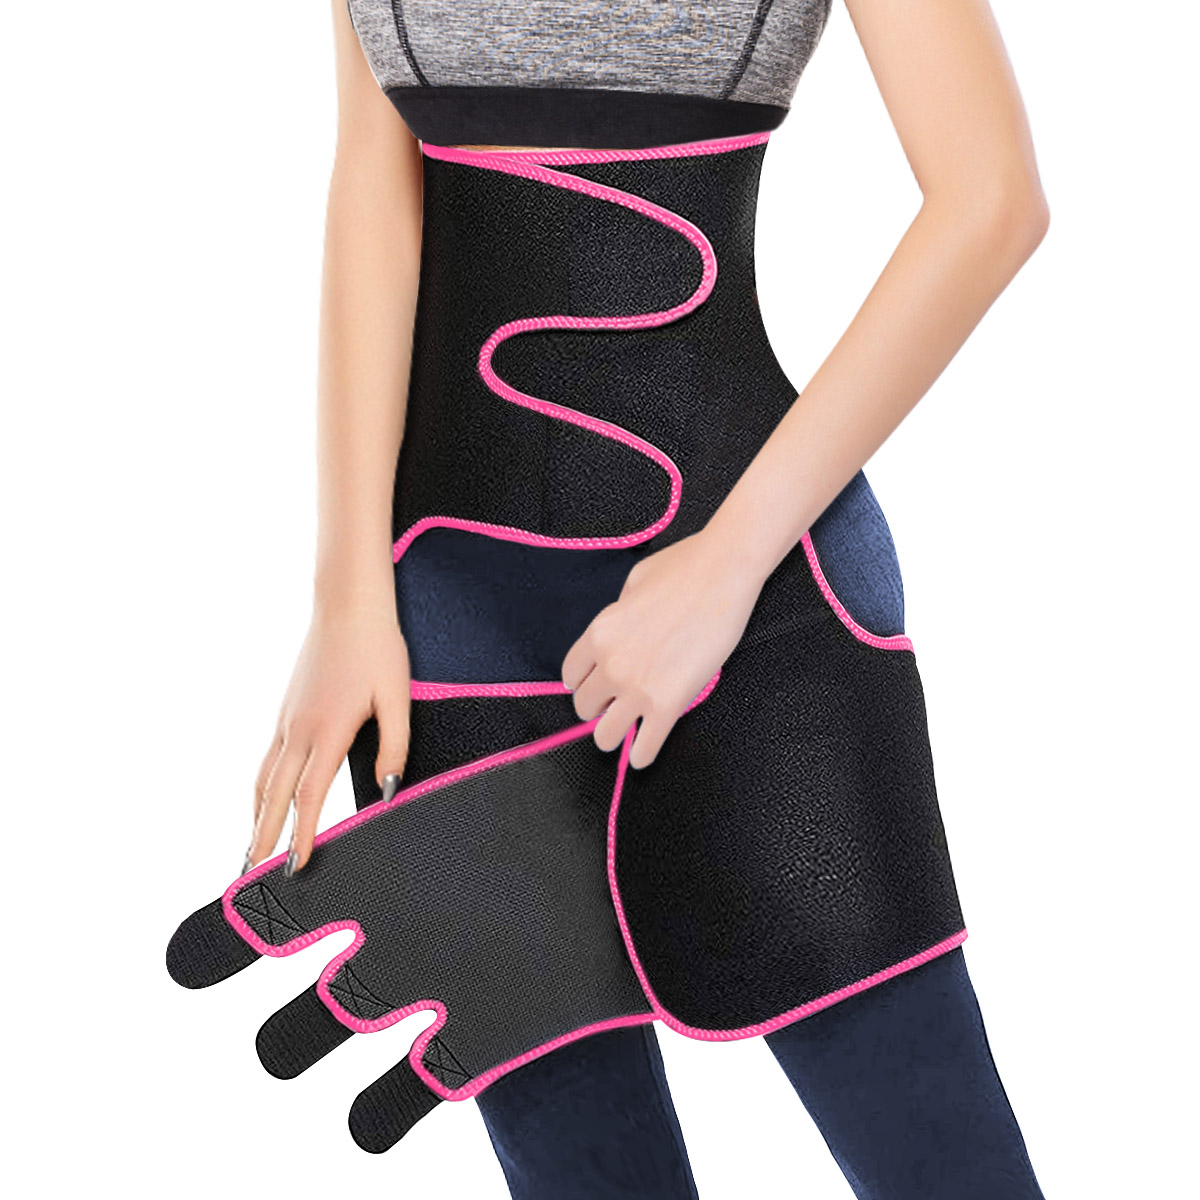 3-in-1-Waist-Thigh-Trimmer-Hip-Enhancer-Waist-Trainer-Back-Proection-Gear-for-Shaping-Body-Slimbing--1741996-1